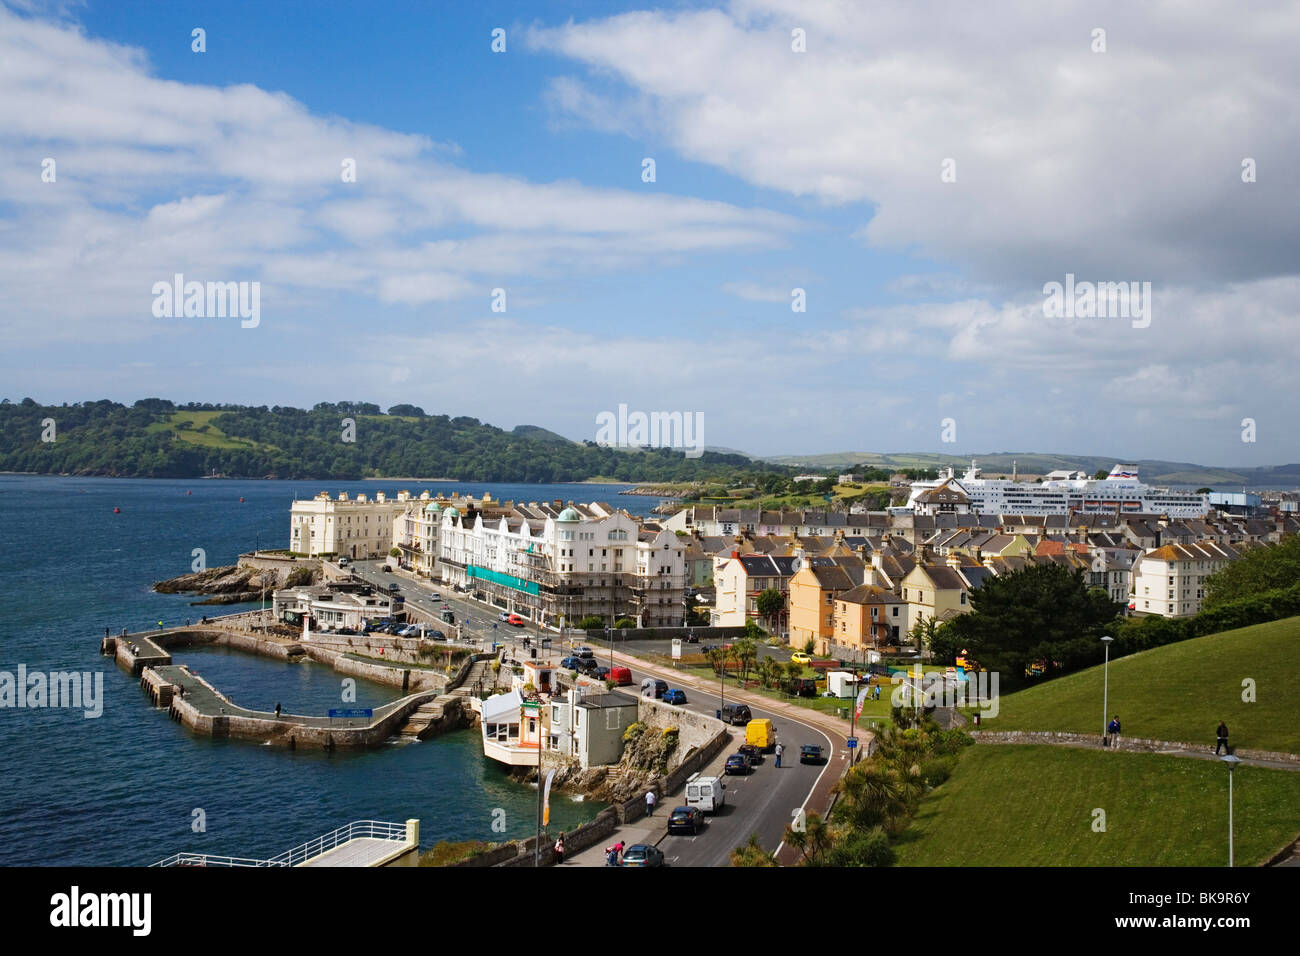 High angle view of the harbor, Plymouth, Devon, England, United Kingdom Stock Photo